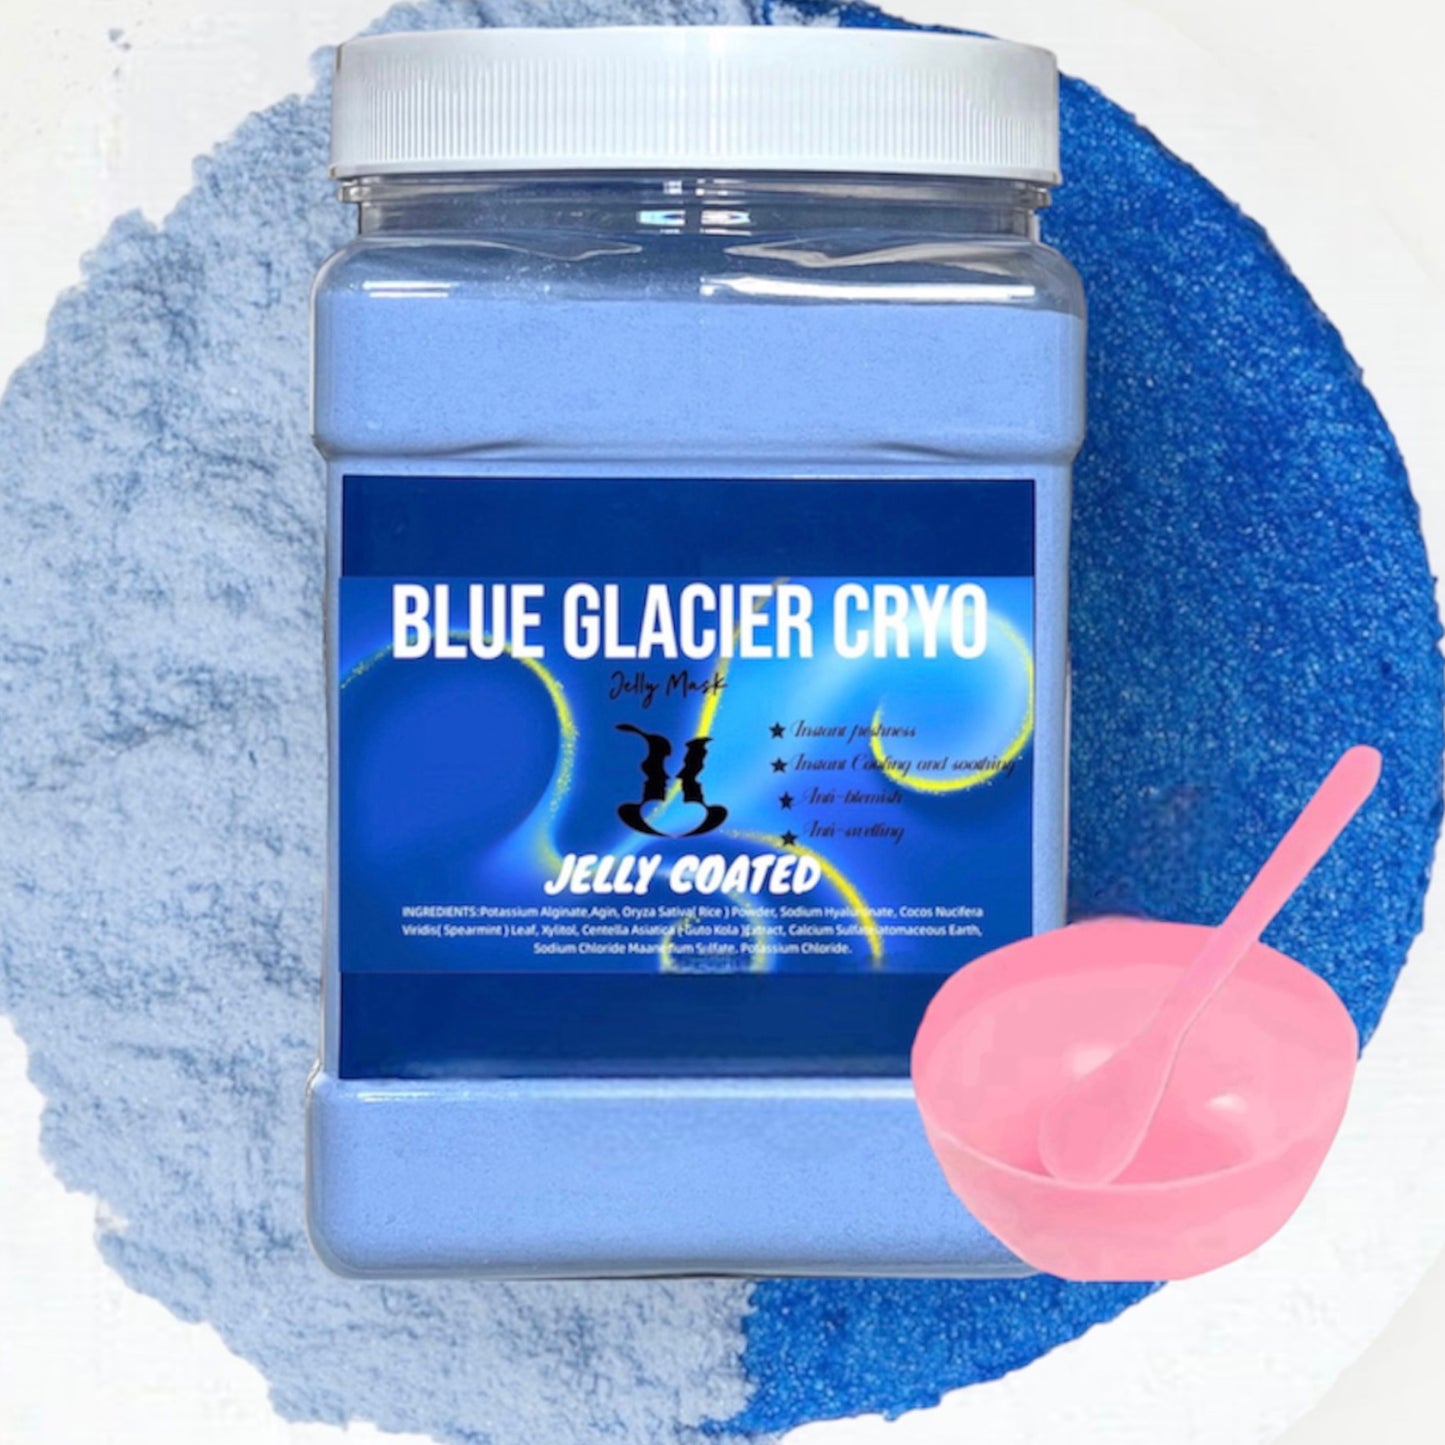 Blue Glacier Cryo Jelly Mask for Facials: Peel Off Hydrojelly Mask PowderJar: Hydrating, Brightening, Firming Jelly Face Masks